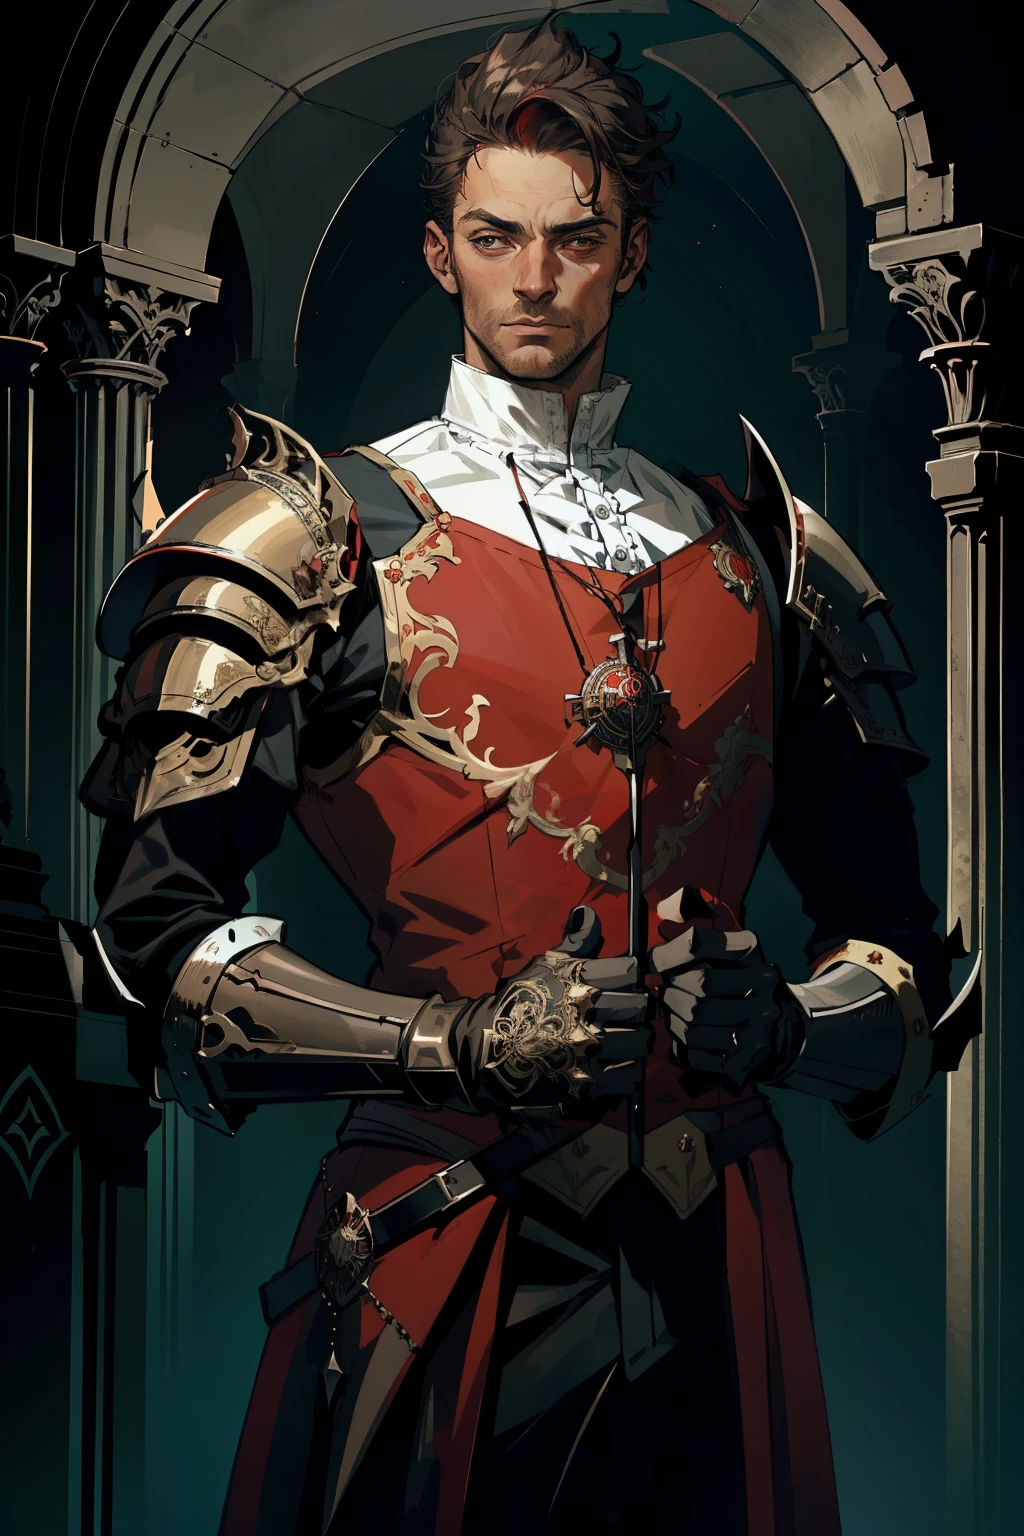 A man in a dark red Victorian suit. The shoulders and head are protected by armor, and a two-handed sword is in his hands. He looks directly at the viewer, wearing a deaf steel helmet.